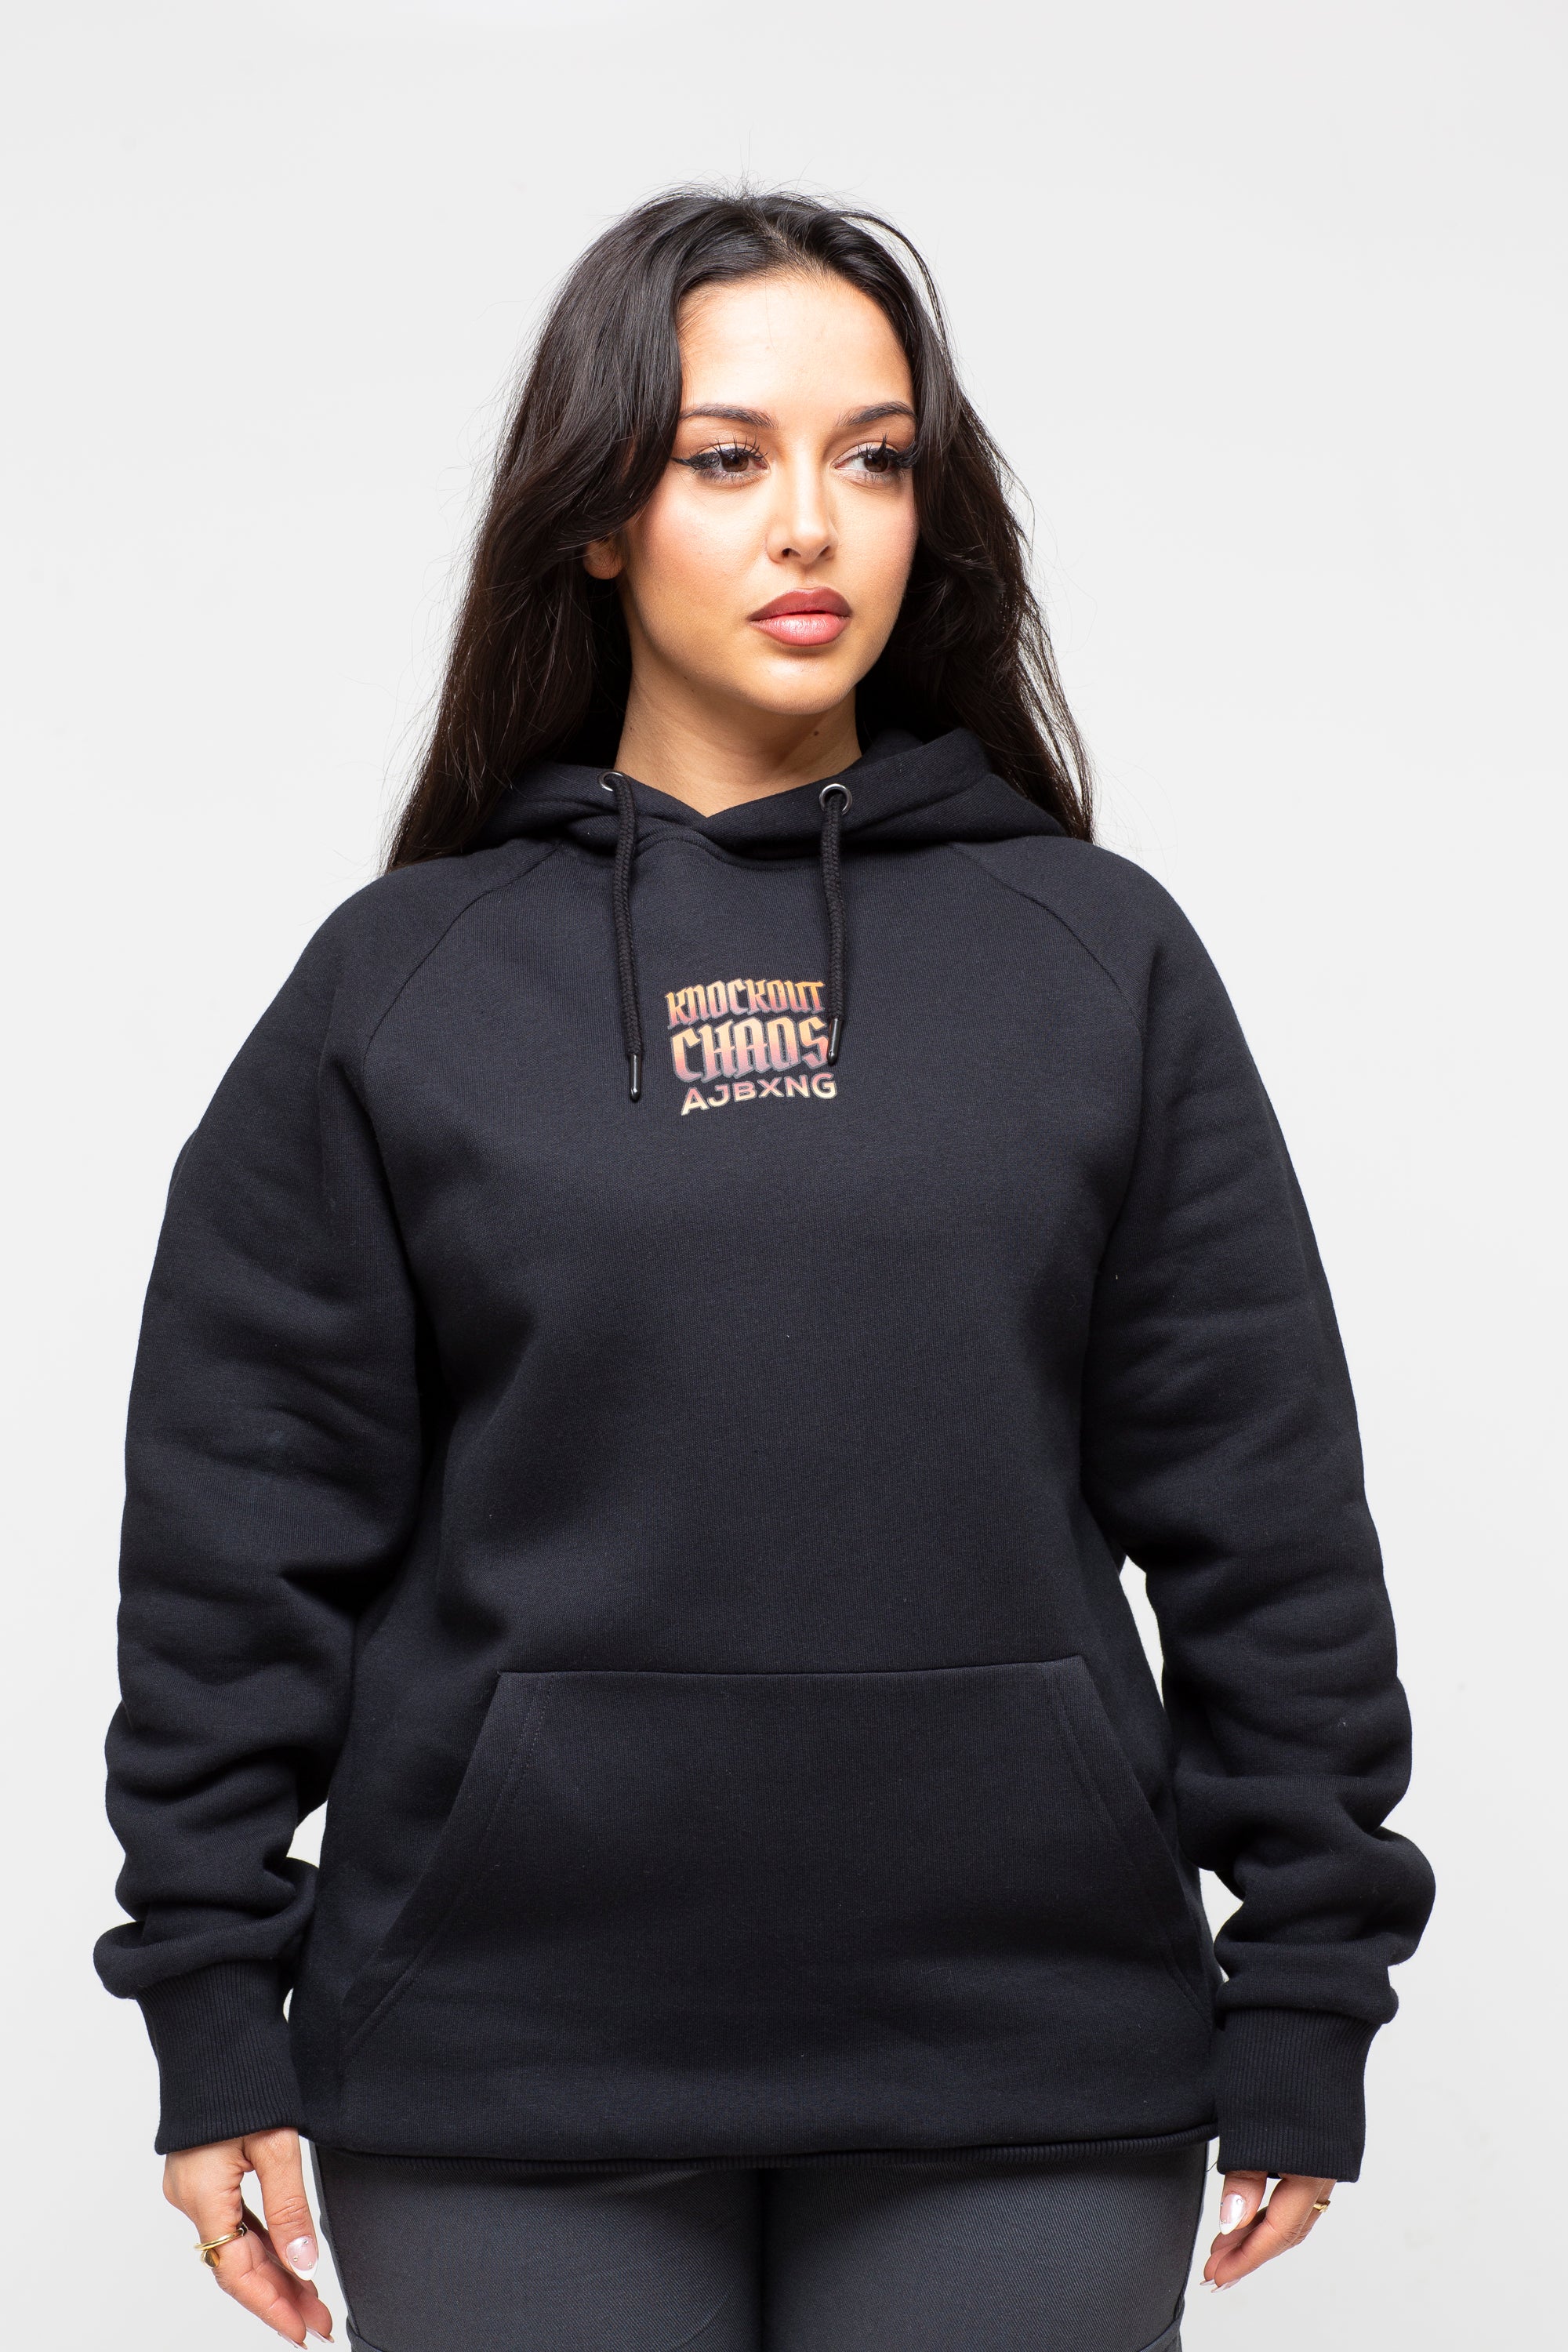 Fight Night 'Knock Out Chaos" Hoodie - Burnt Orange Logo